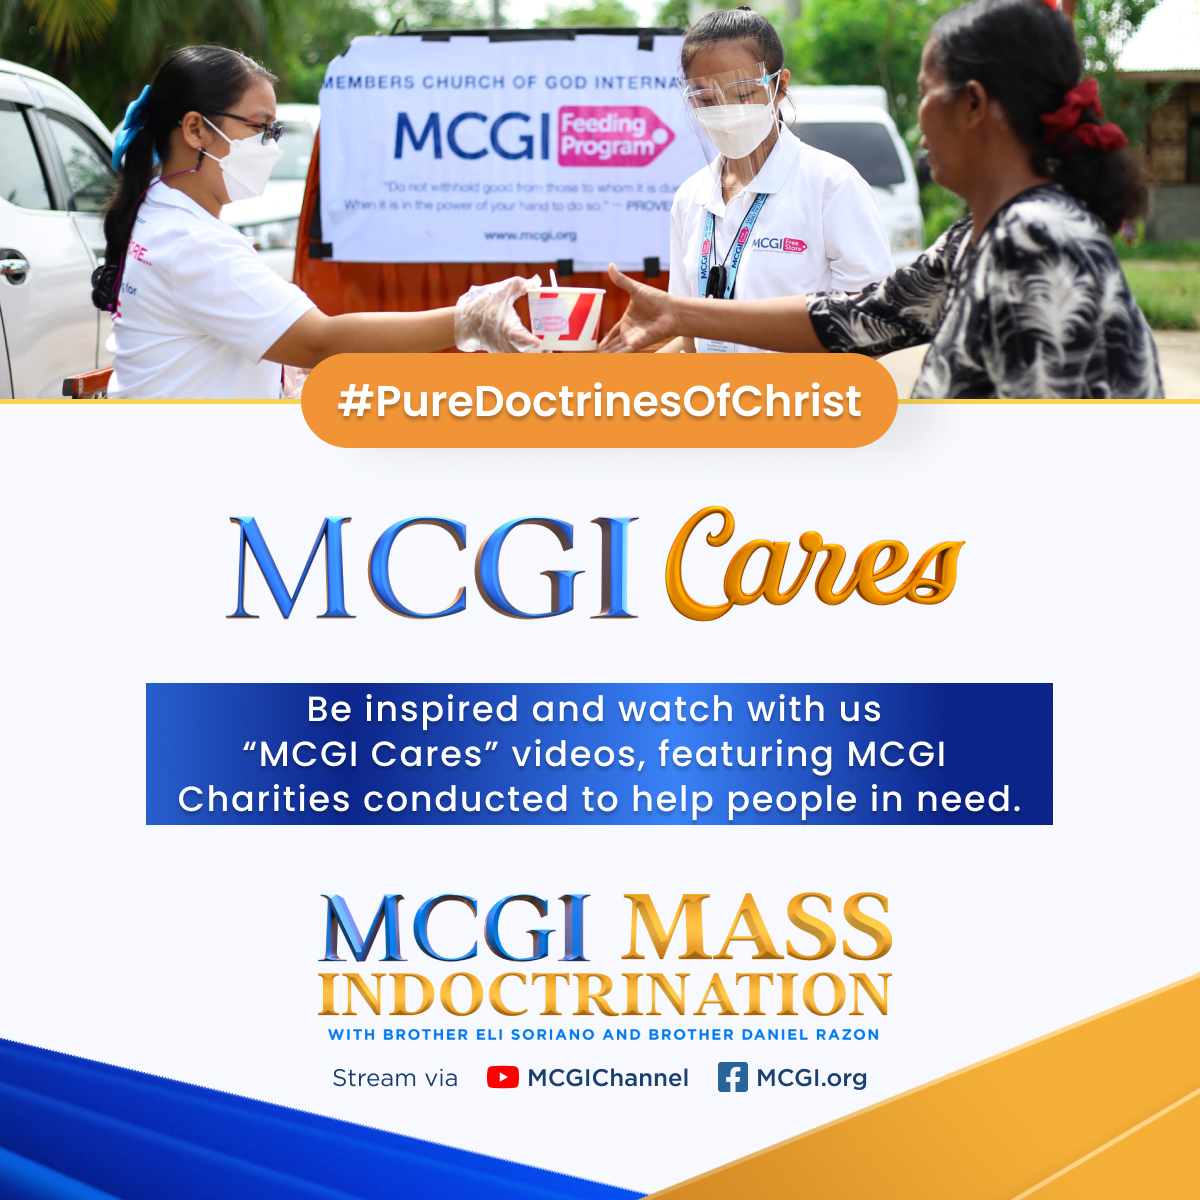 Be inspired! Watch our short videos of good works done in faith, hope, and love.

Catch the news recaps of our “MCGI Cares” community outreaches right before the Mass Indoctrination starts!

How Should We Treat People
#PureDoctrinesOfChrist